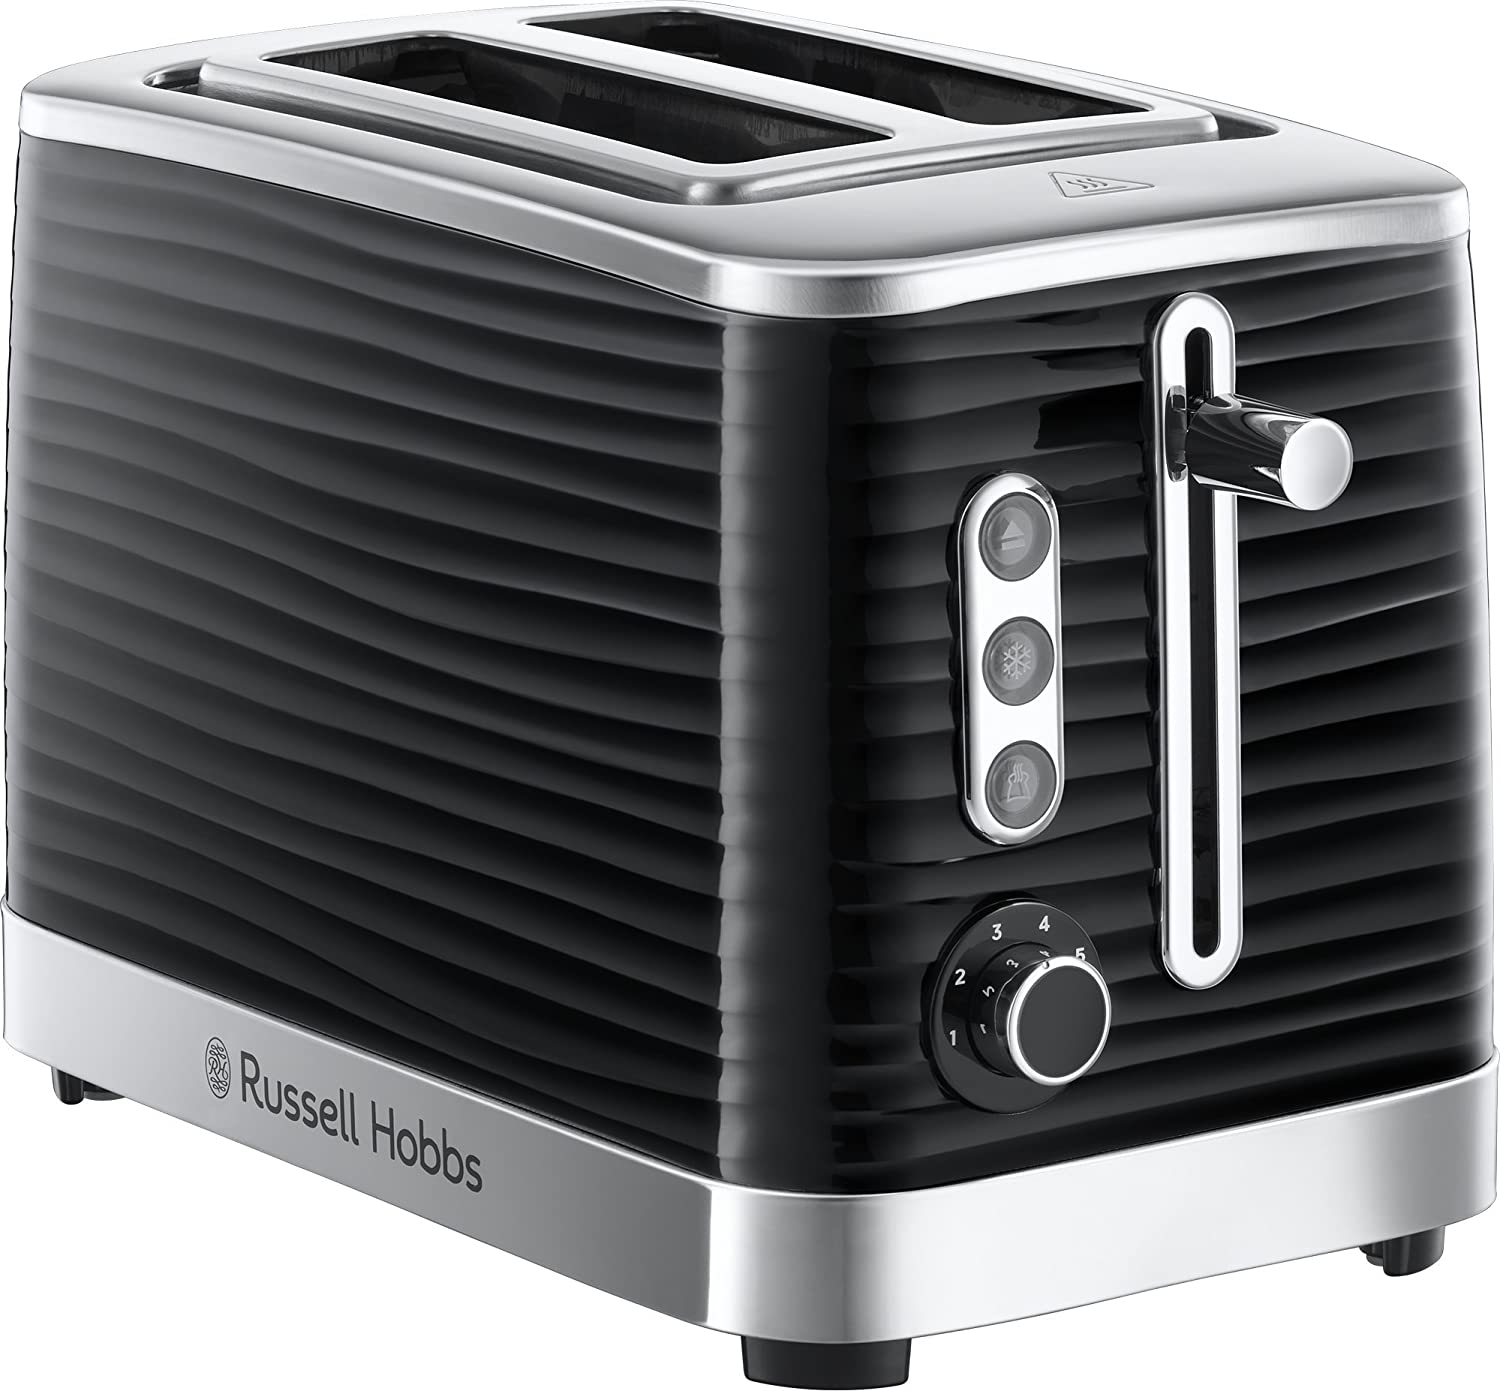 Russell Hobbs 24371 Inspire High Gloss Toaster with 2 Slices - Black {4008496972562}